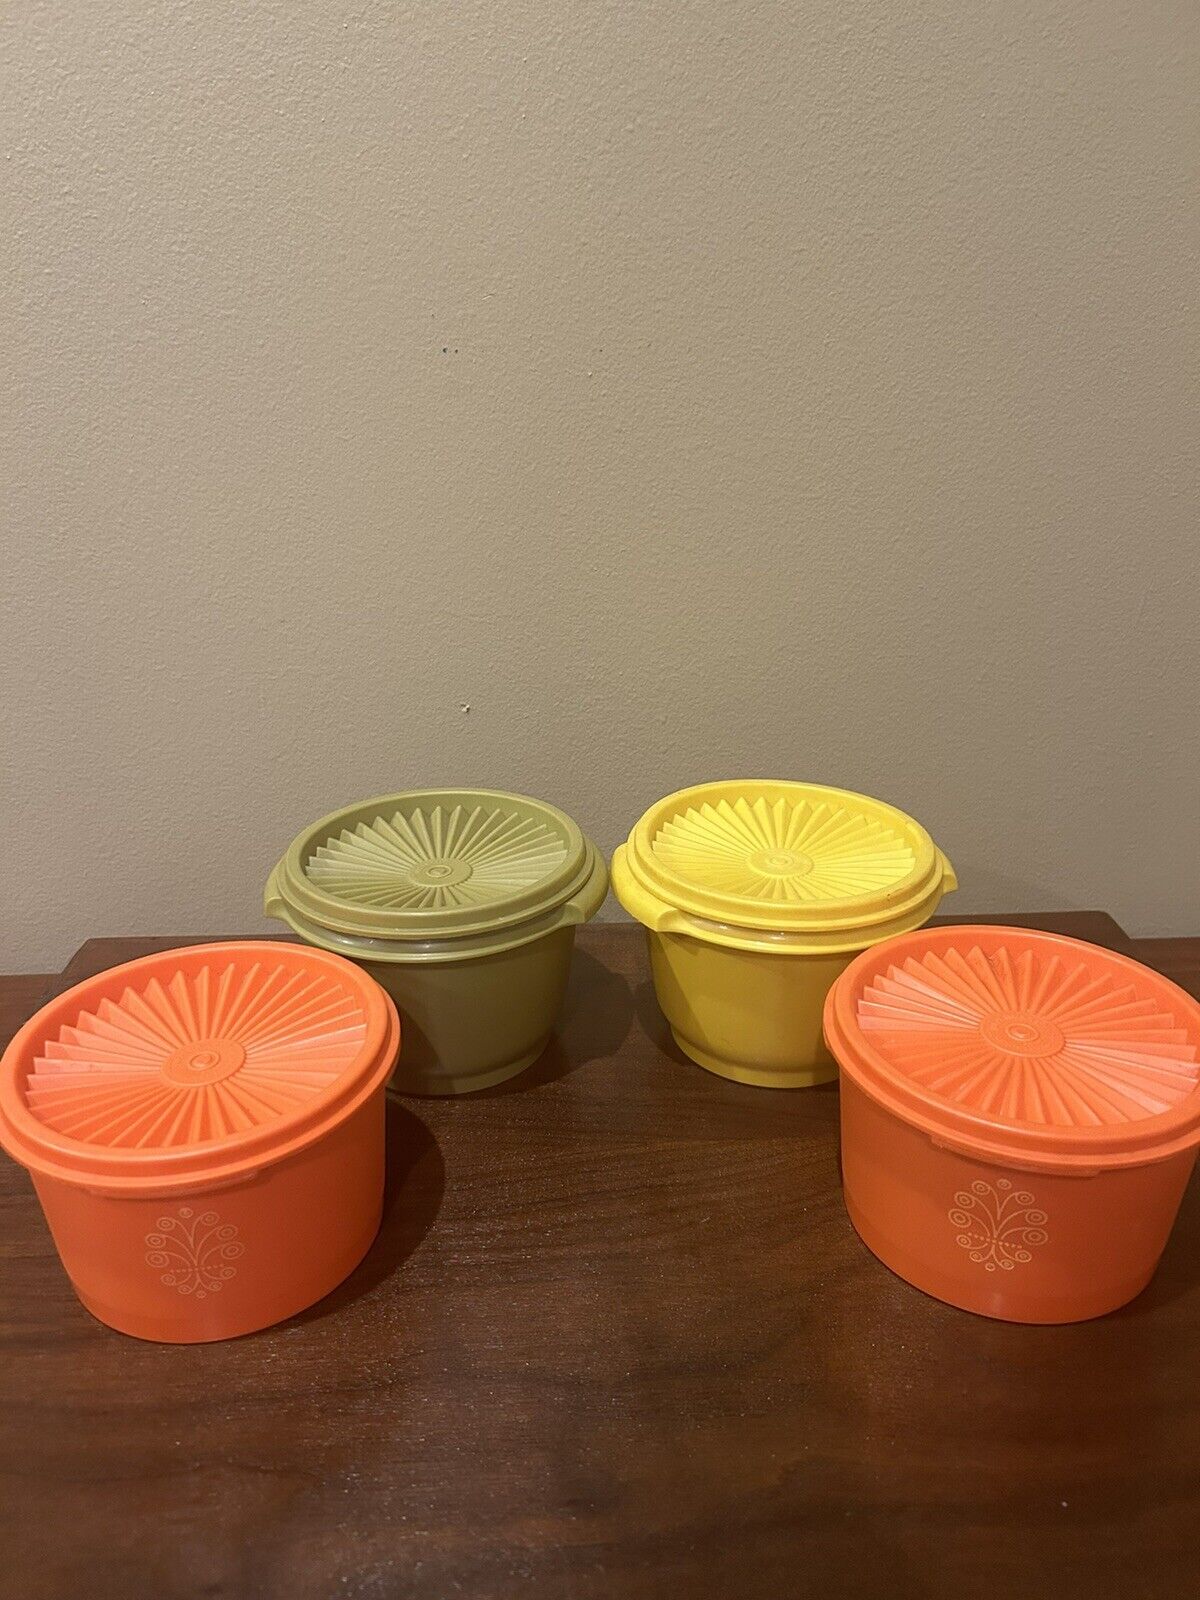 Lot of 4 Tupperware 20-oz bowls with Lids Vintage #1297 (2) and #886 (2)